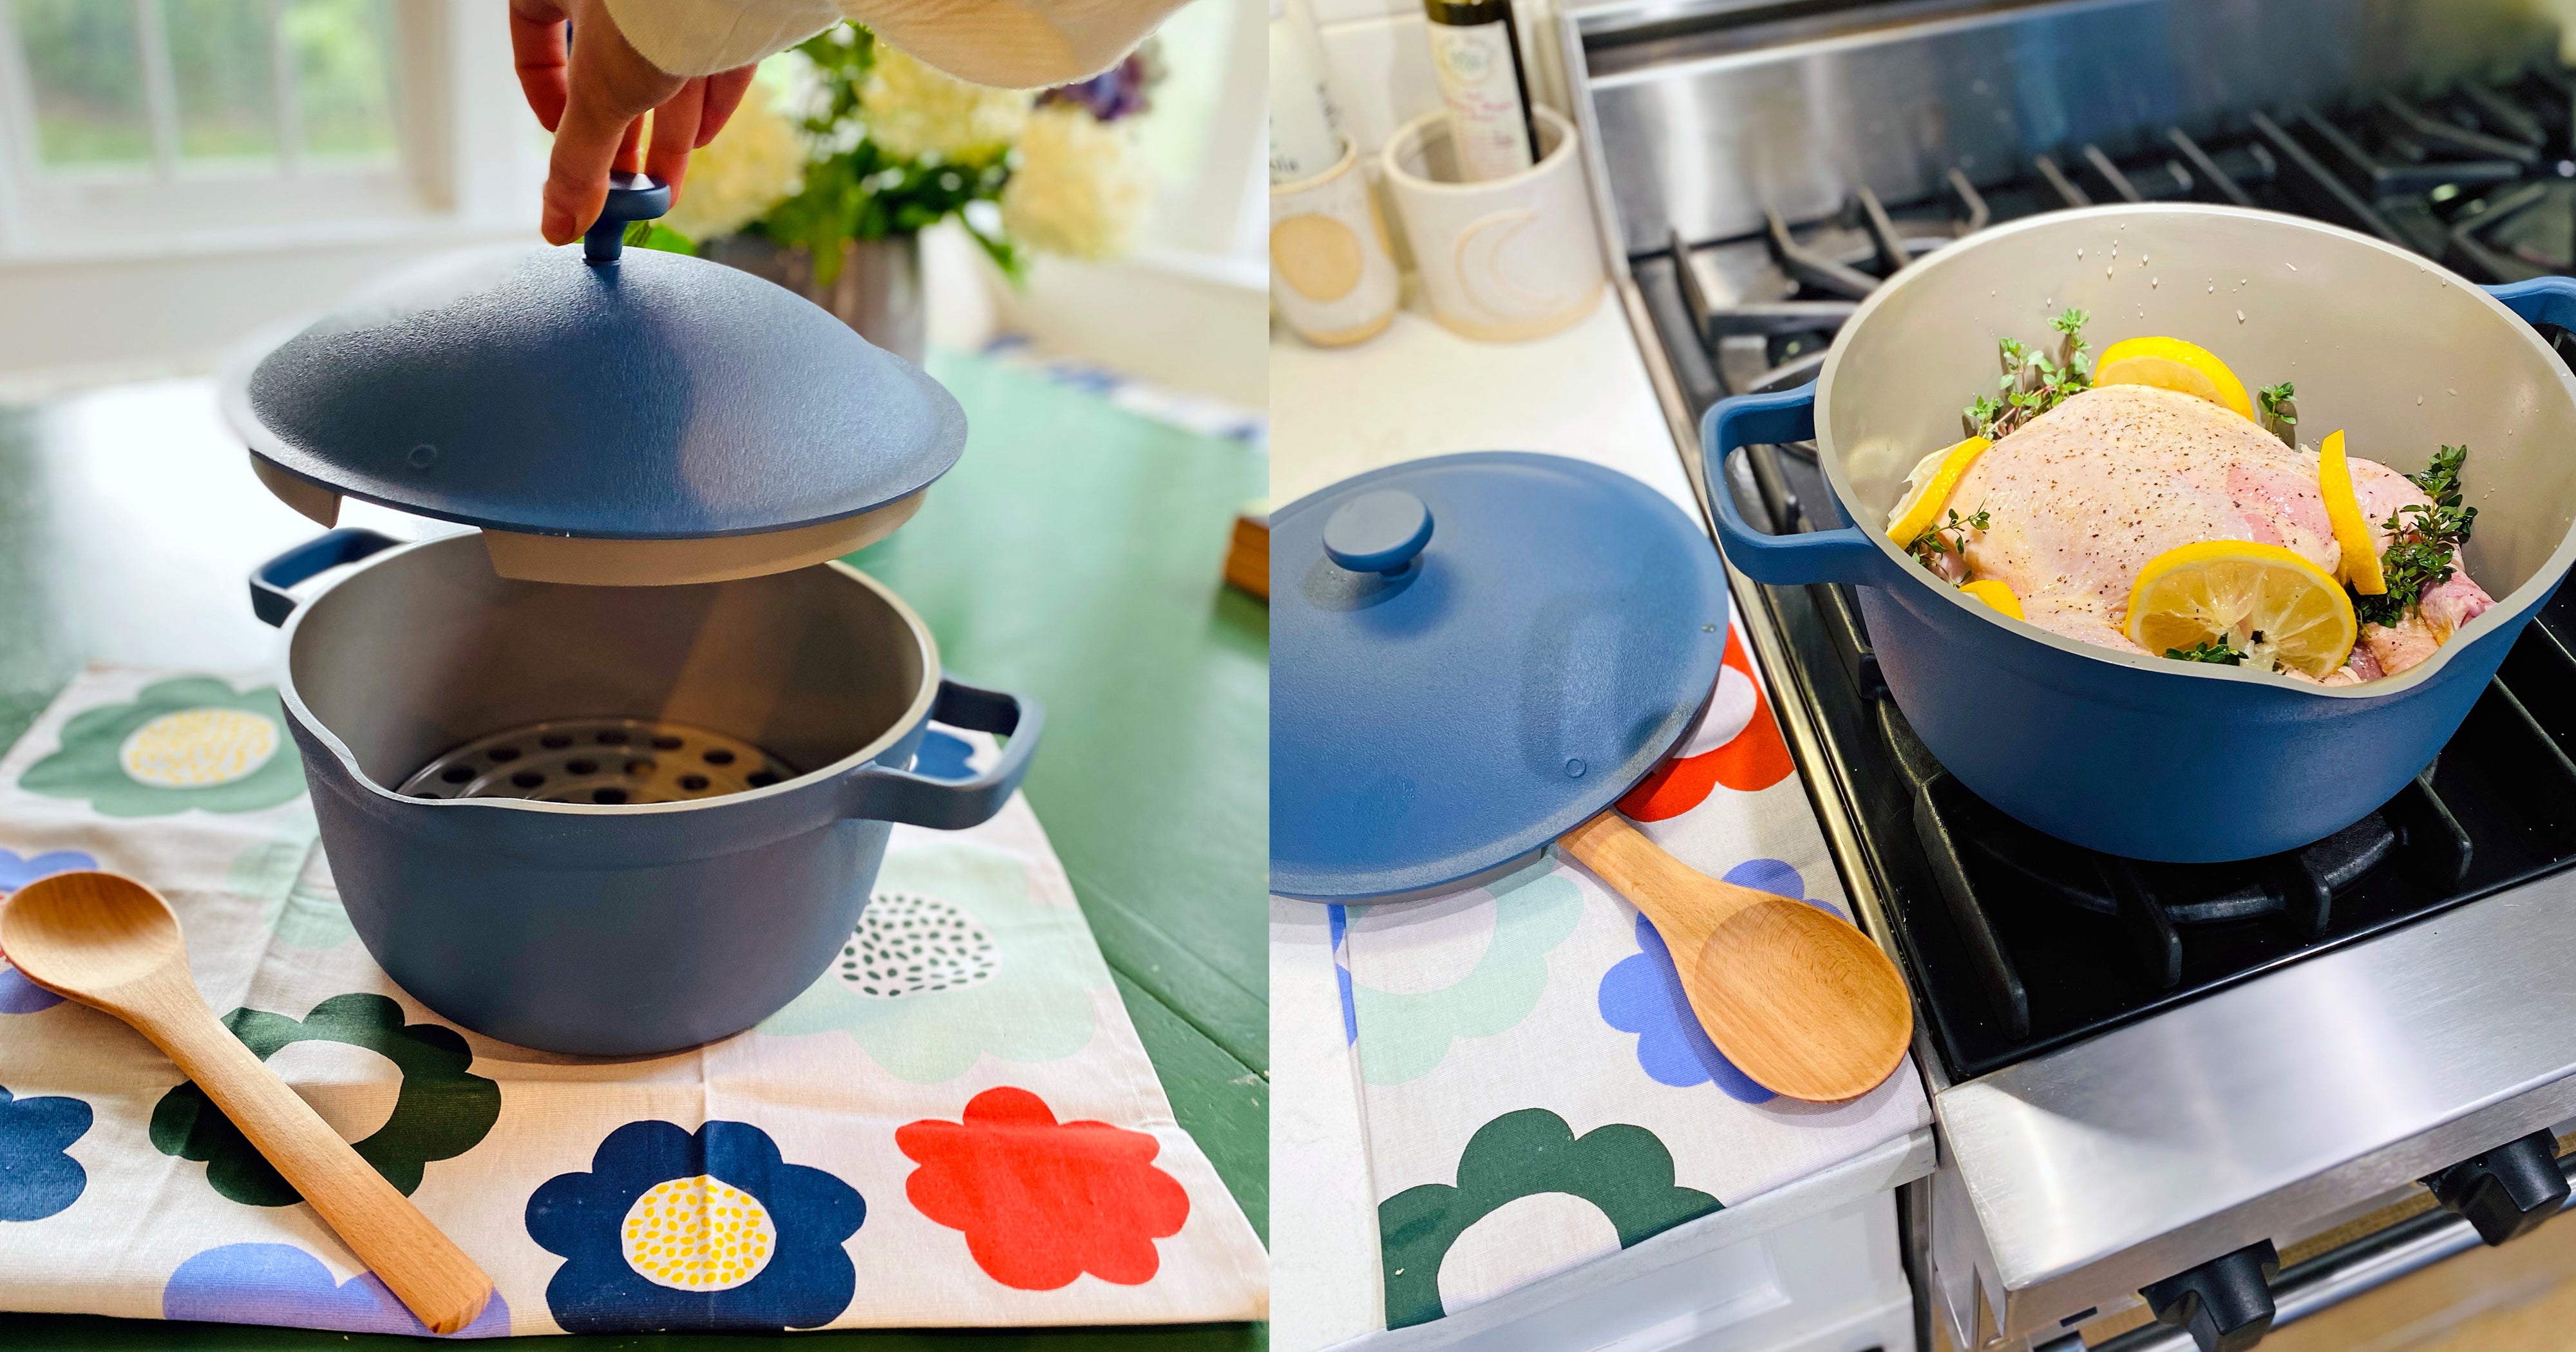 Our Place Cast Iron Perfect Pot Review: A sturdy and chic Dutch oven -  Reviewed